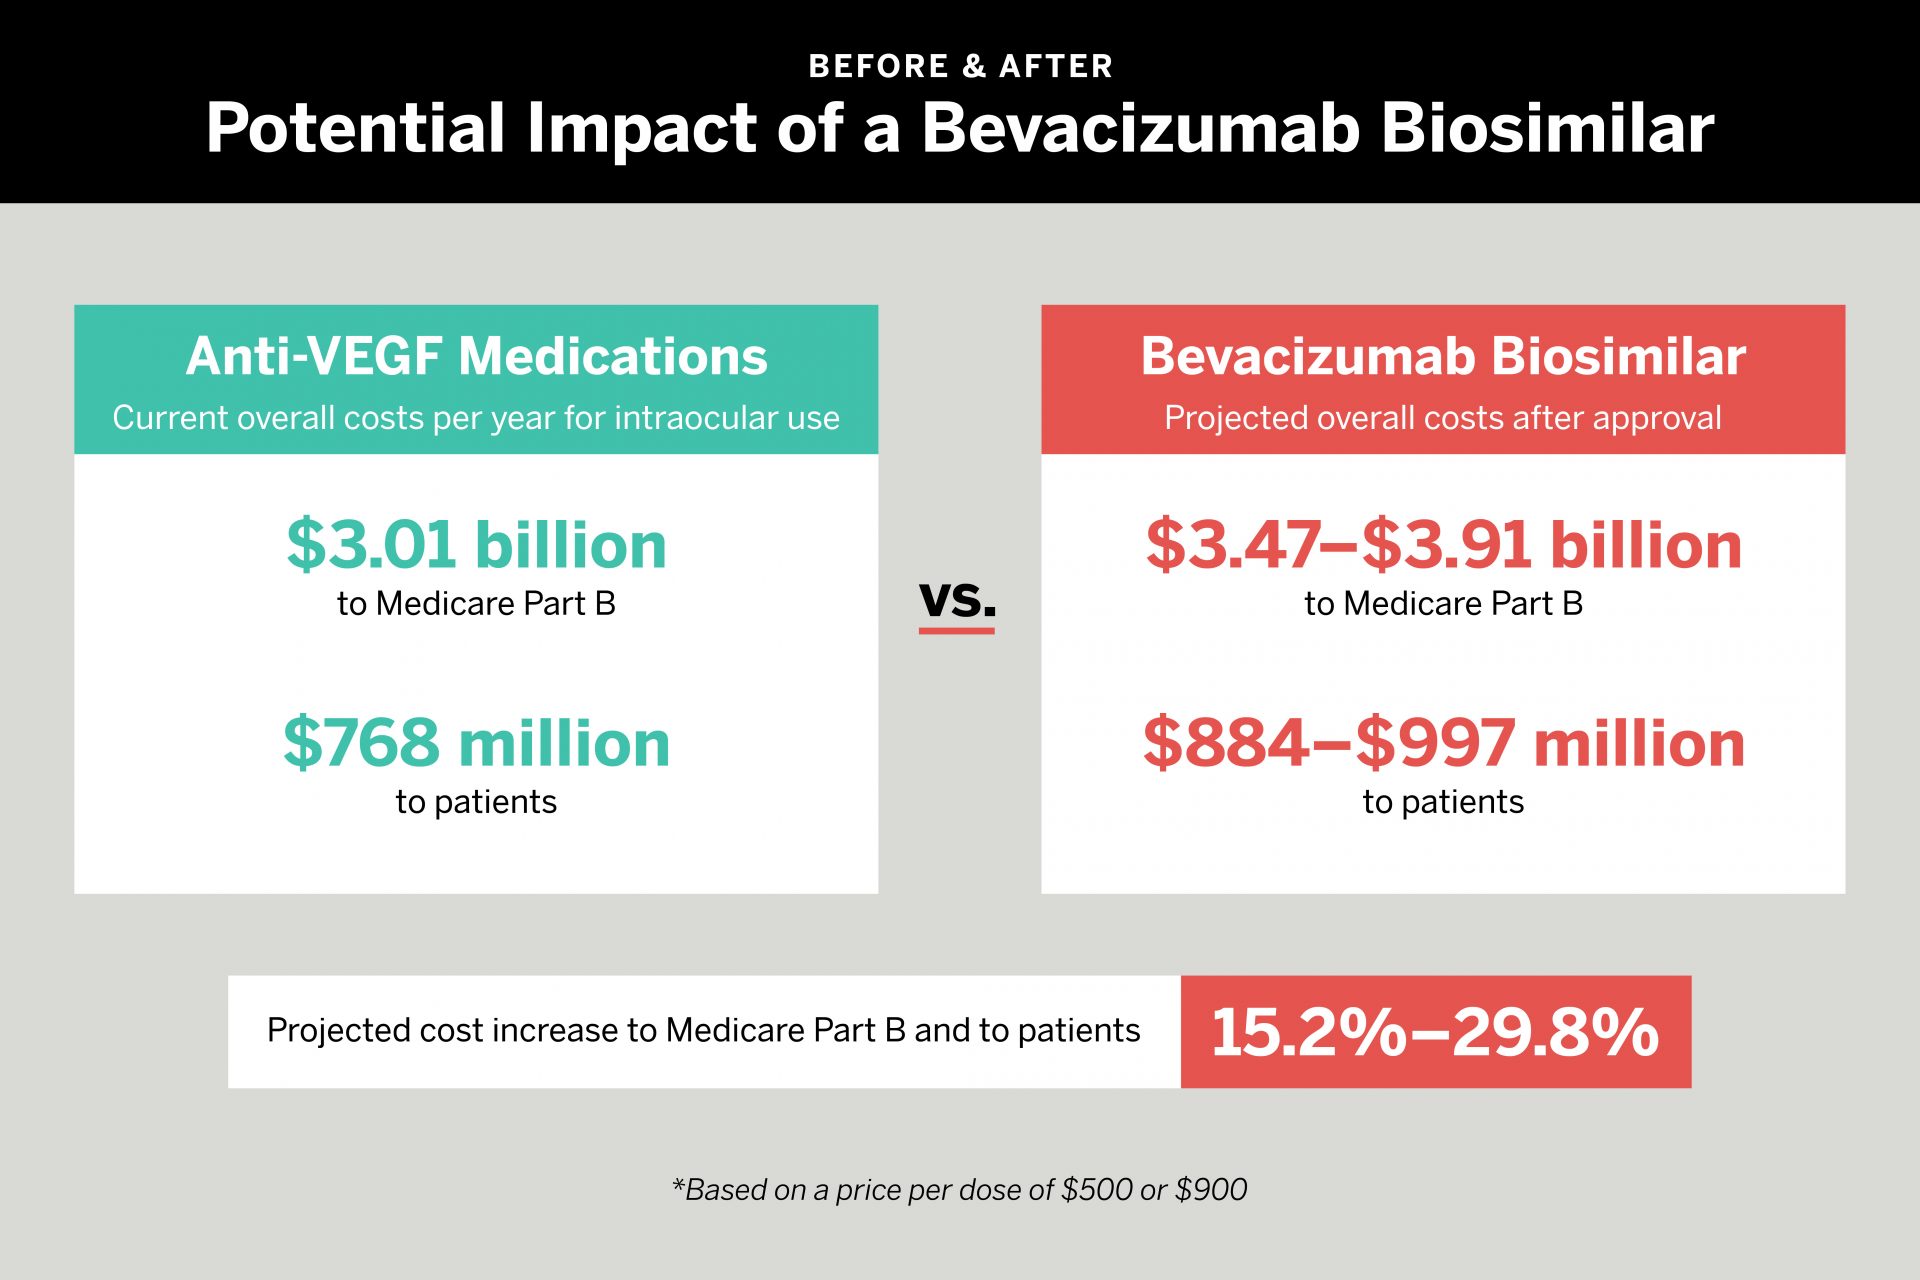 Current costs of intraocular anti-VEGF medications versus projected costs after FDA approval of a bevacizumab biosimilar. ADAPTED FROM: Ophthalmology. 2023 Apr 26;S0161-6420(23)00295-6.